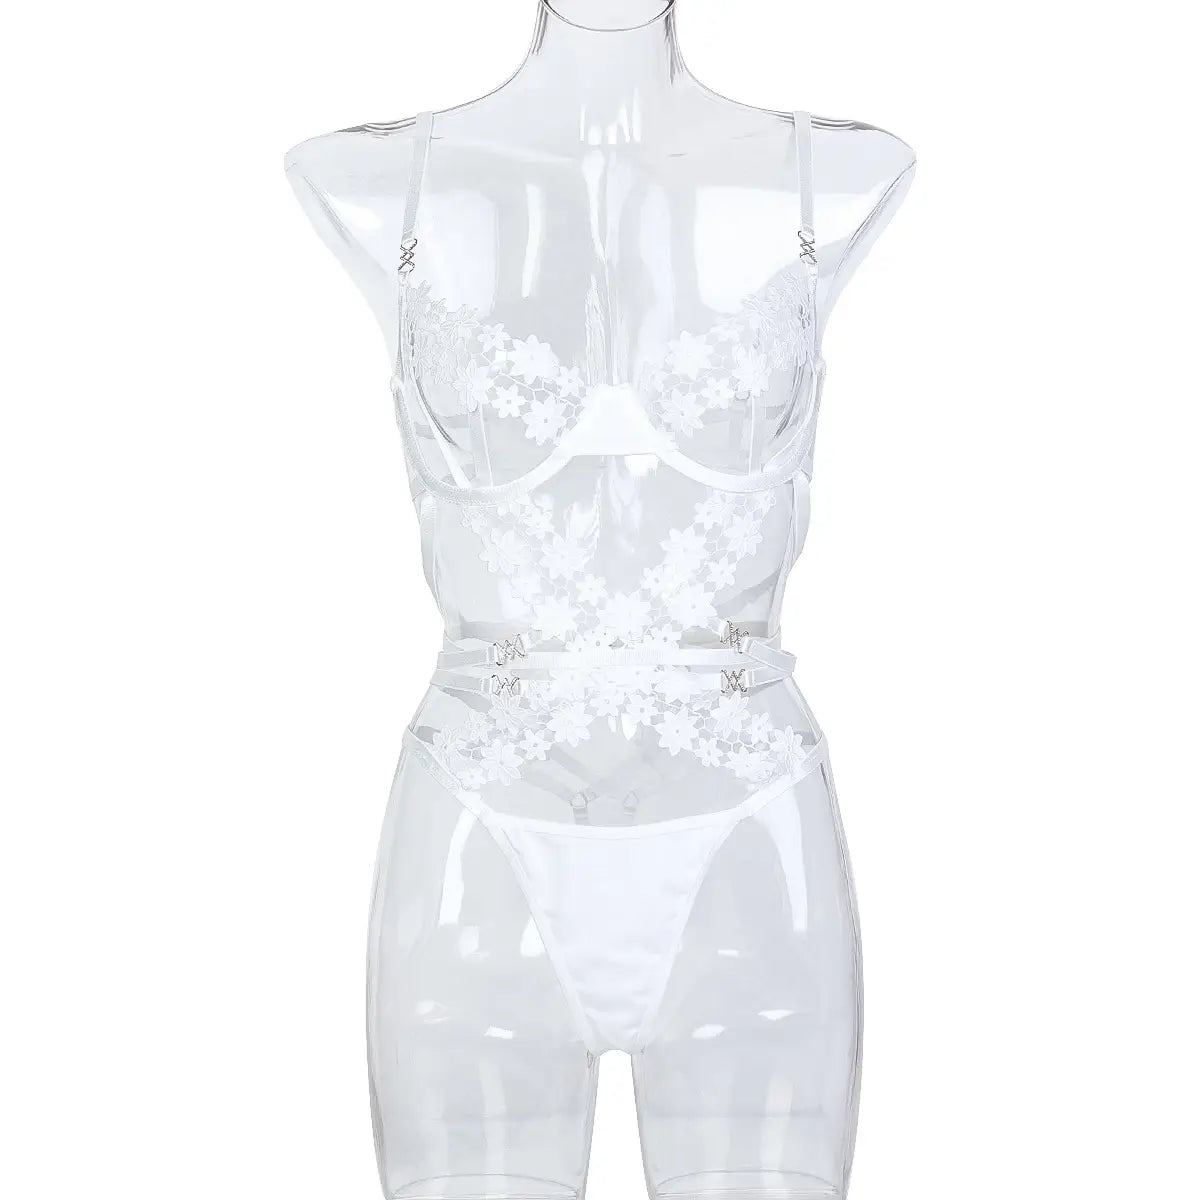 Embroidered Elegance Cutout Bodysuit - Unleash Your Inner Seductress